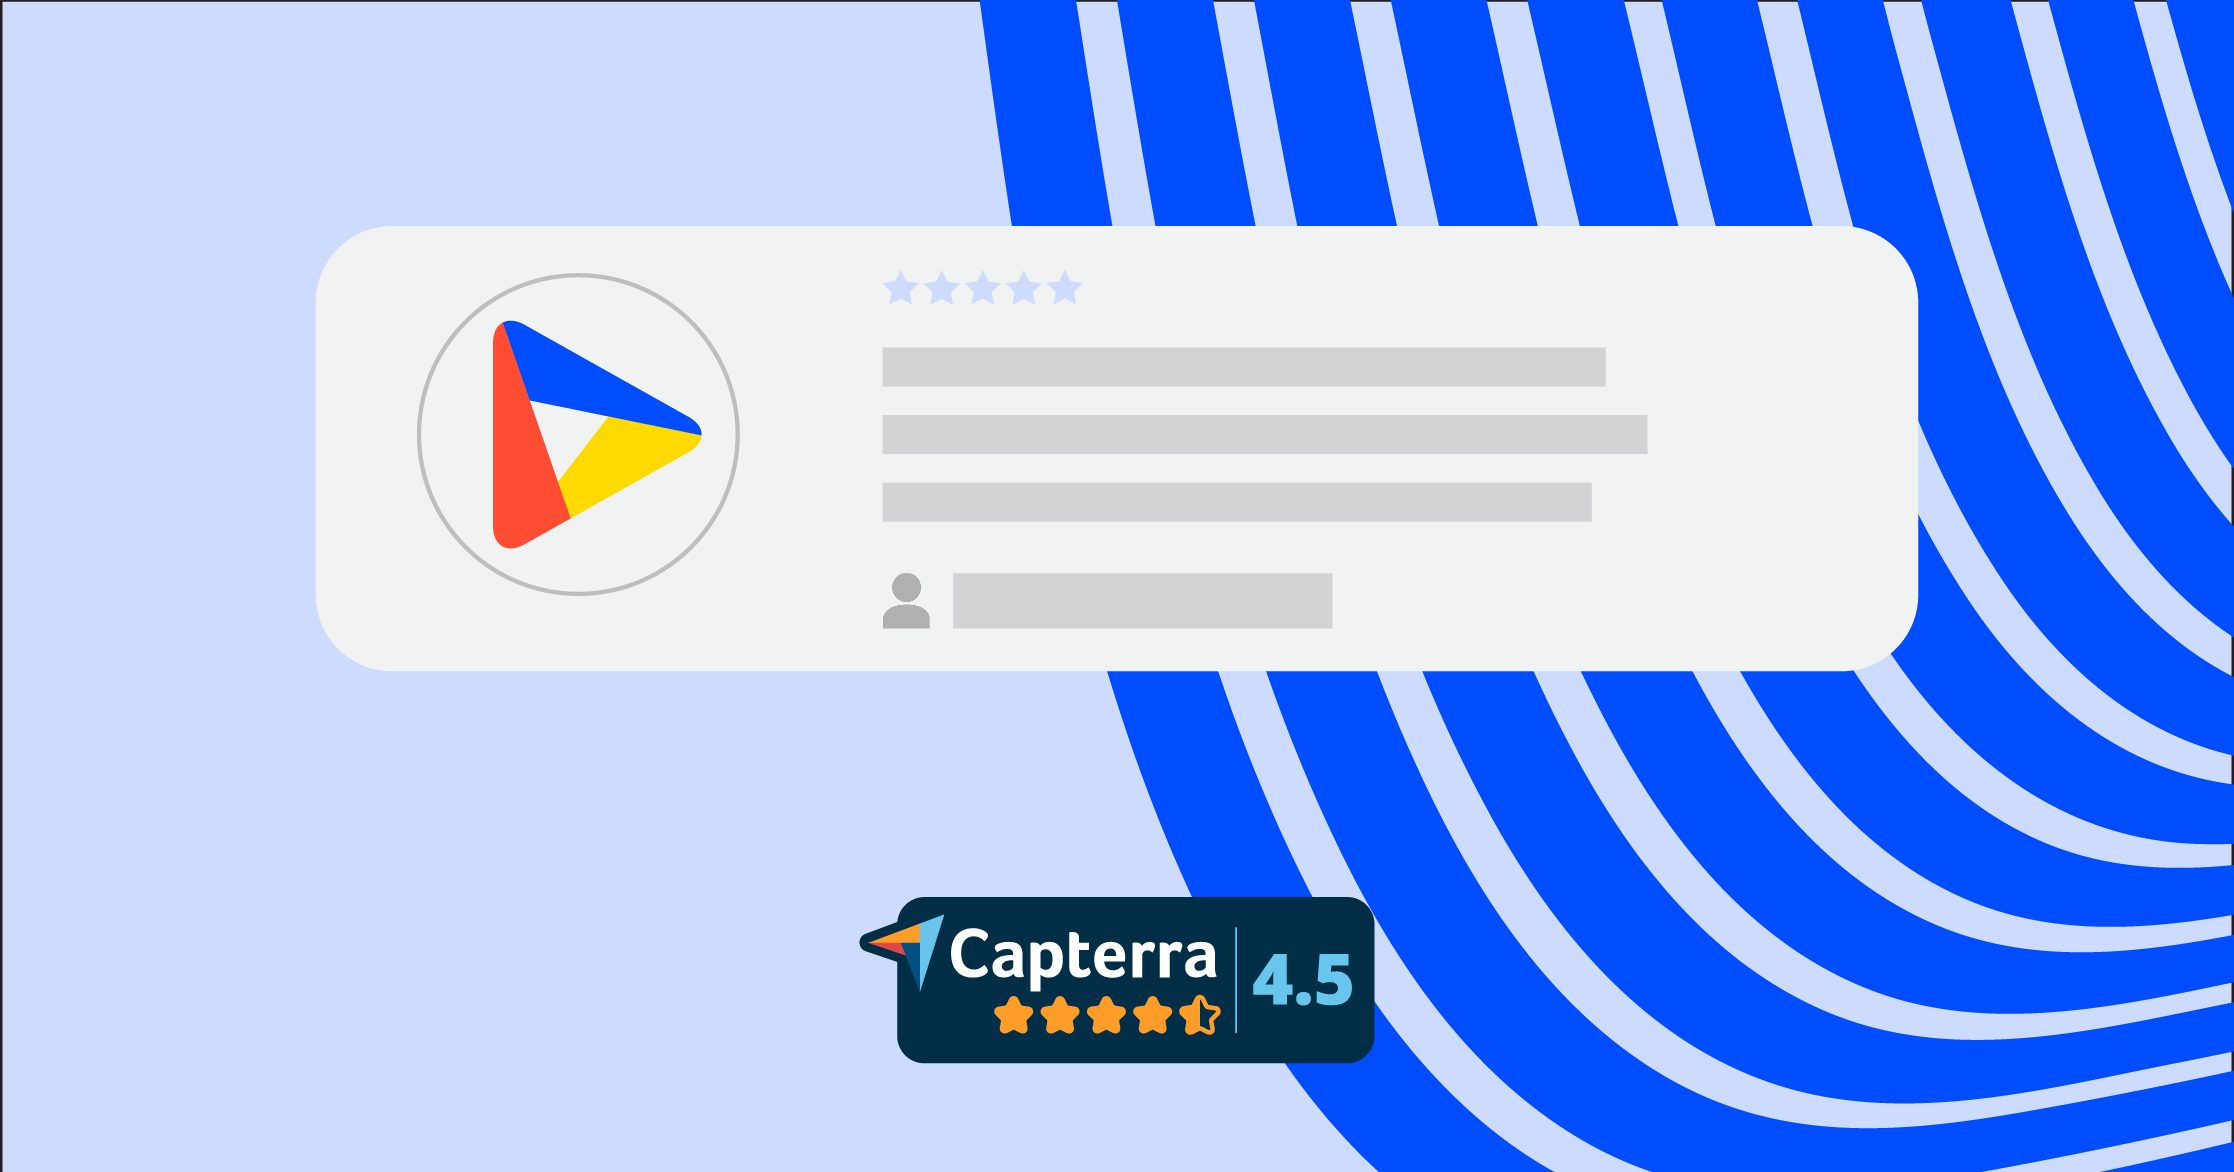 What have we learned with Datylon reviews on Capterra